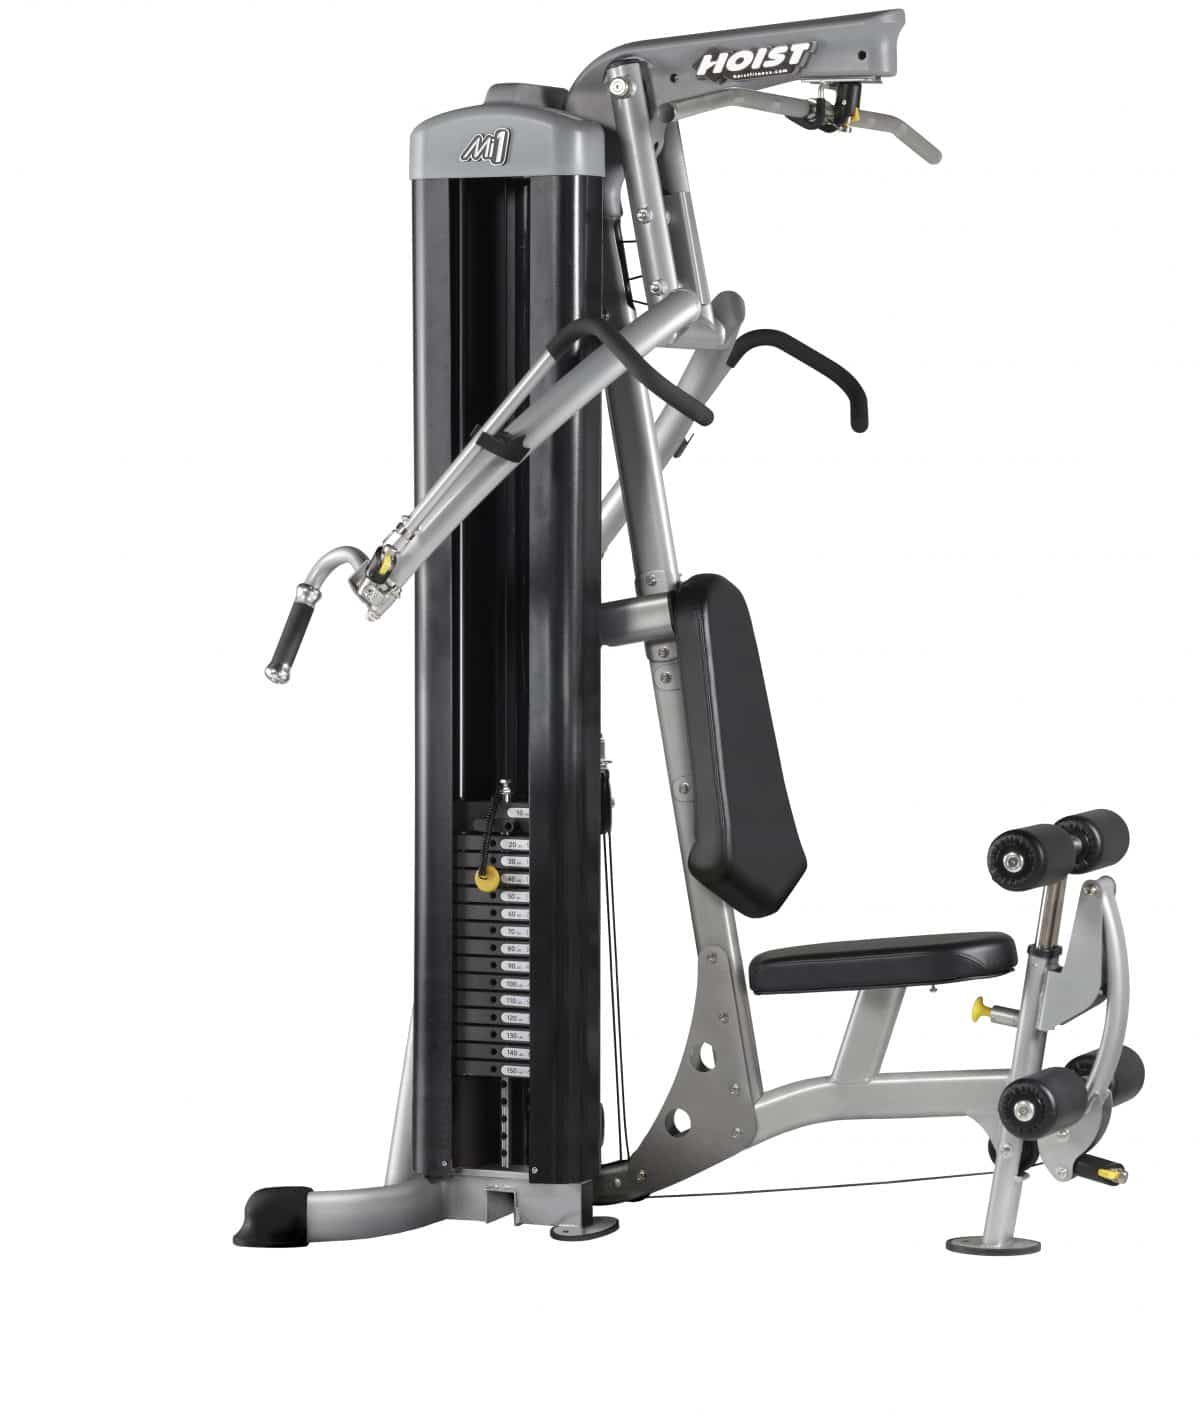 The gym equipment is shown on a white background.